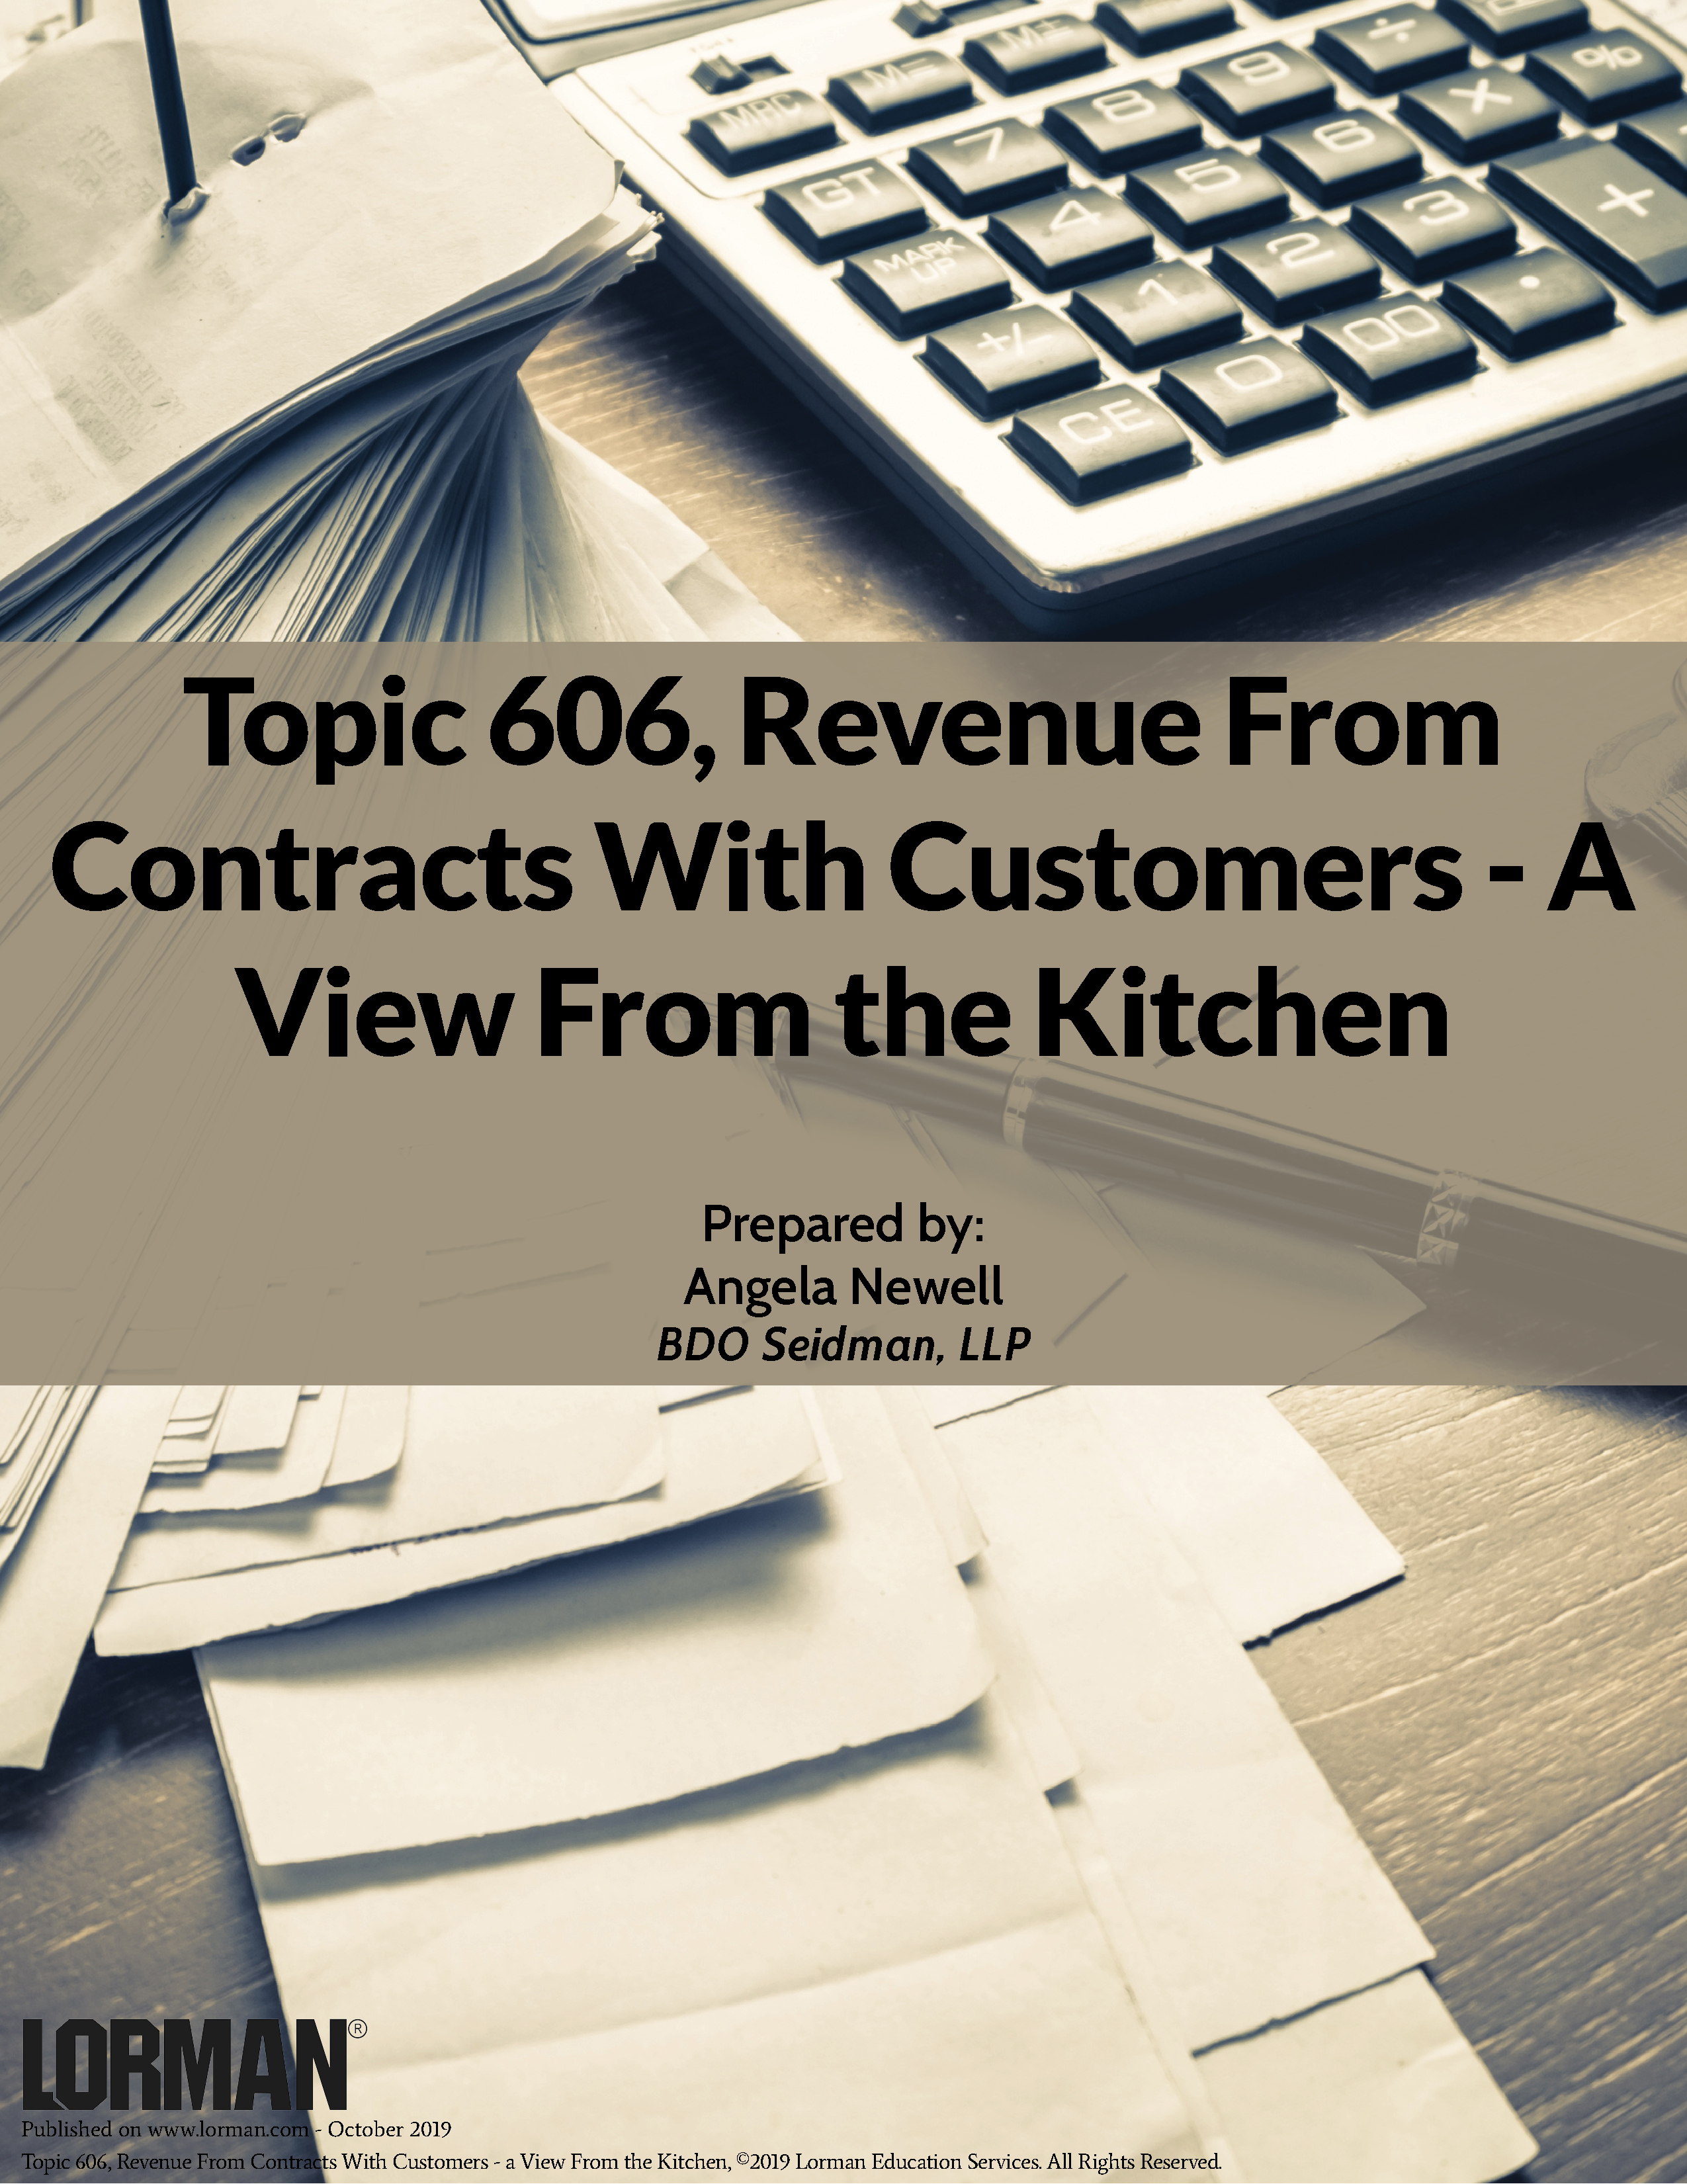 Topic 606, Revenue From Contracts With Customers - A View From the Kitchen